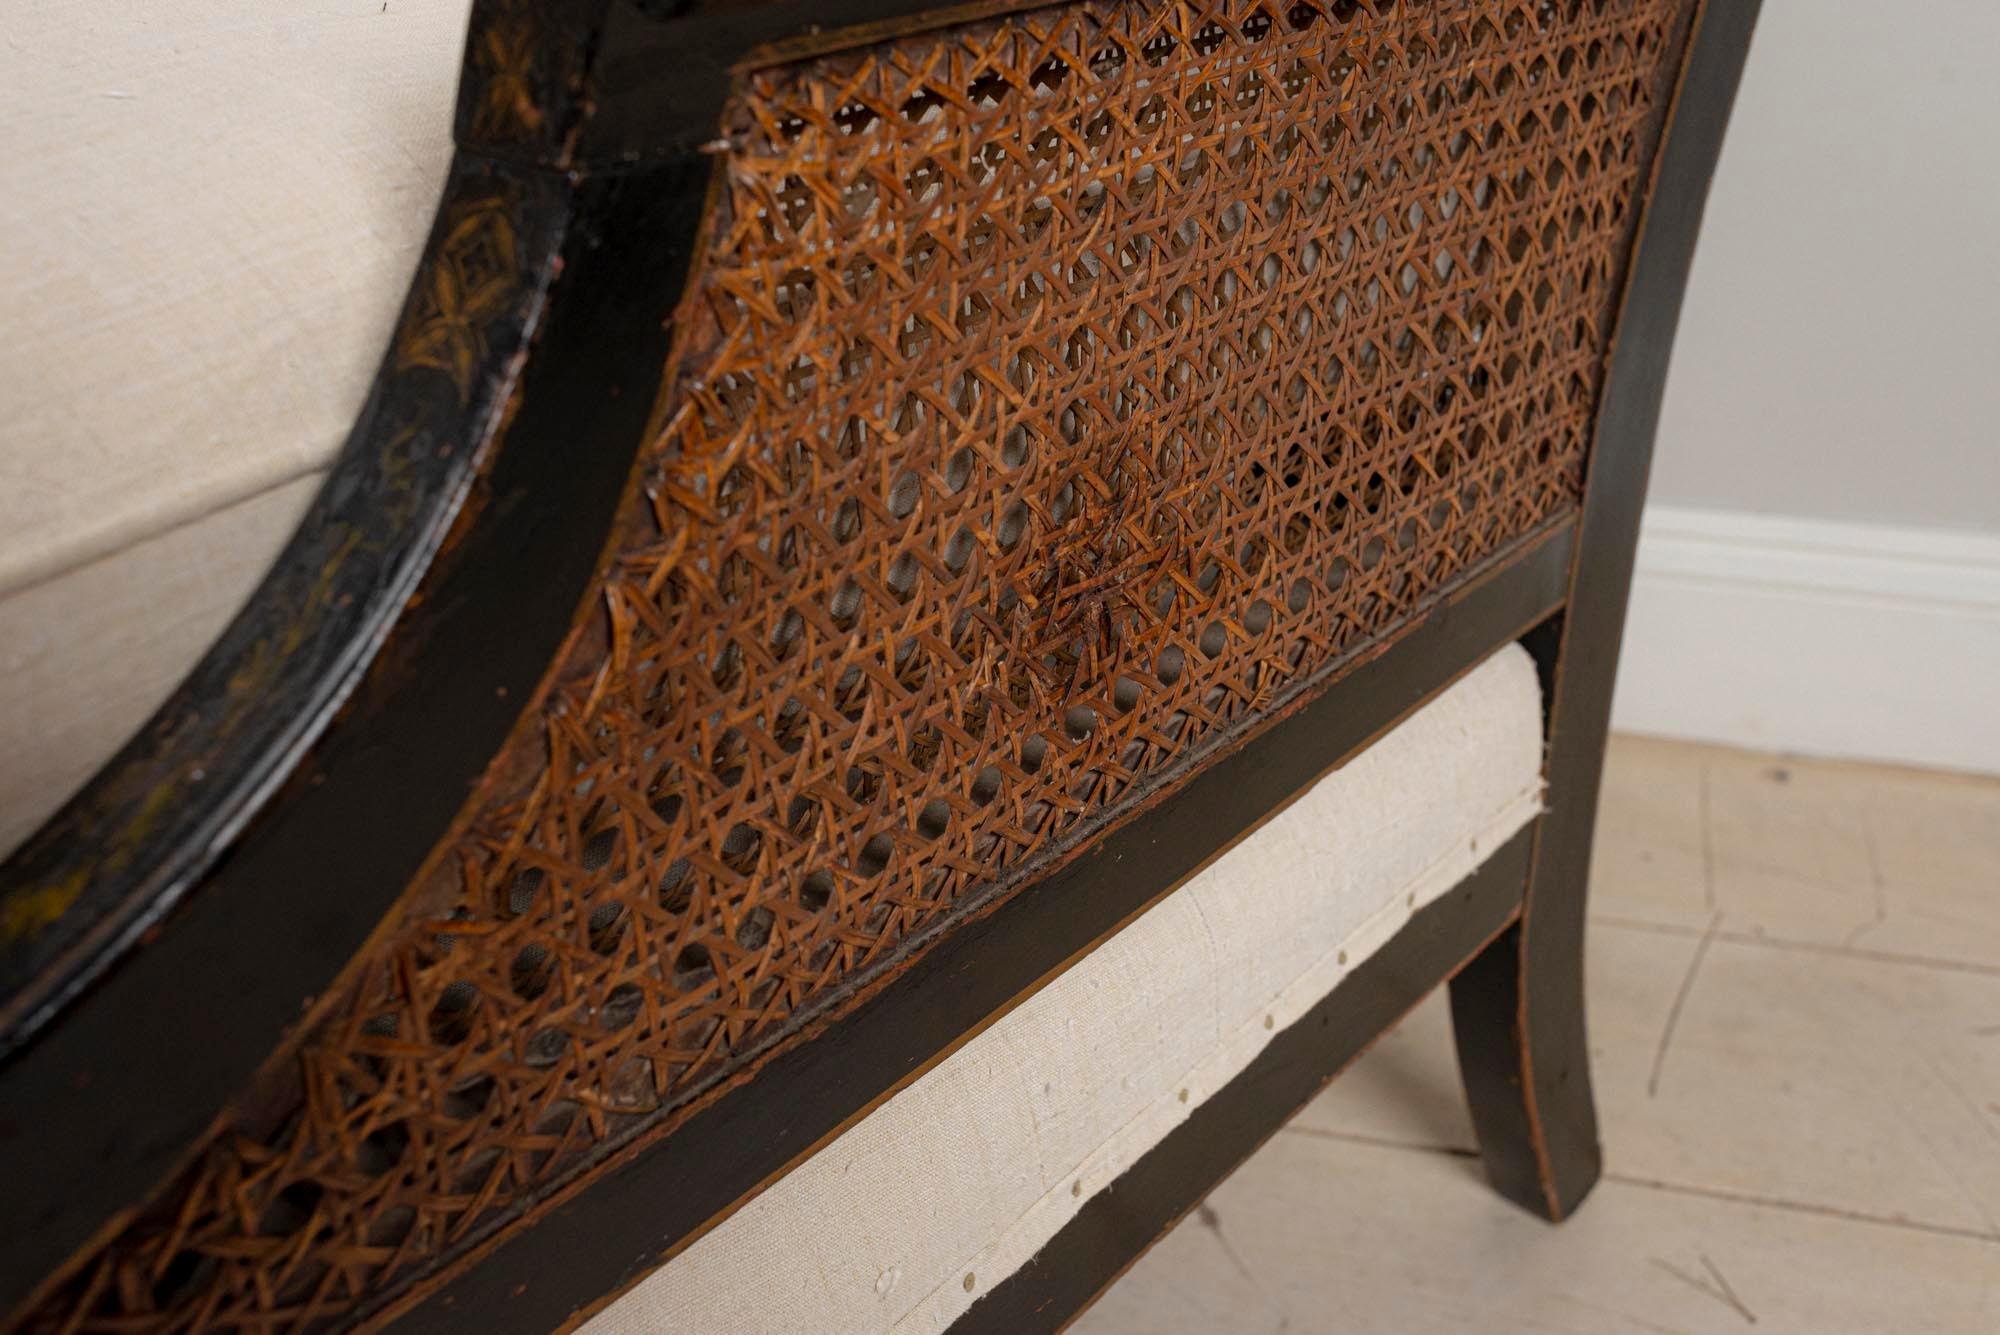 Caning Late 19th Century English Chinoiserie Chair with Caned Sides and Back